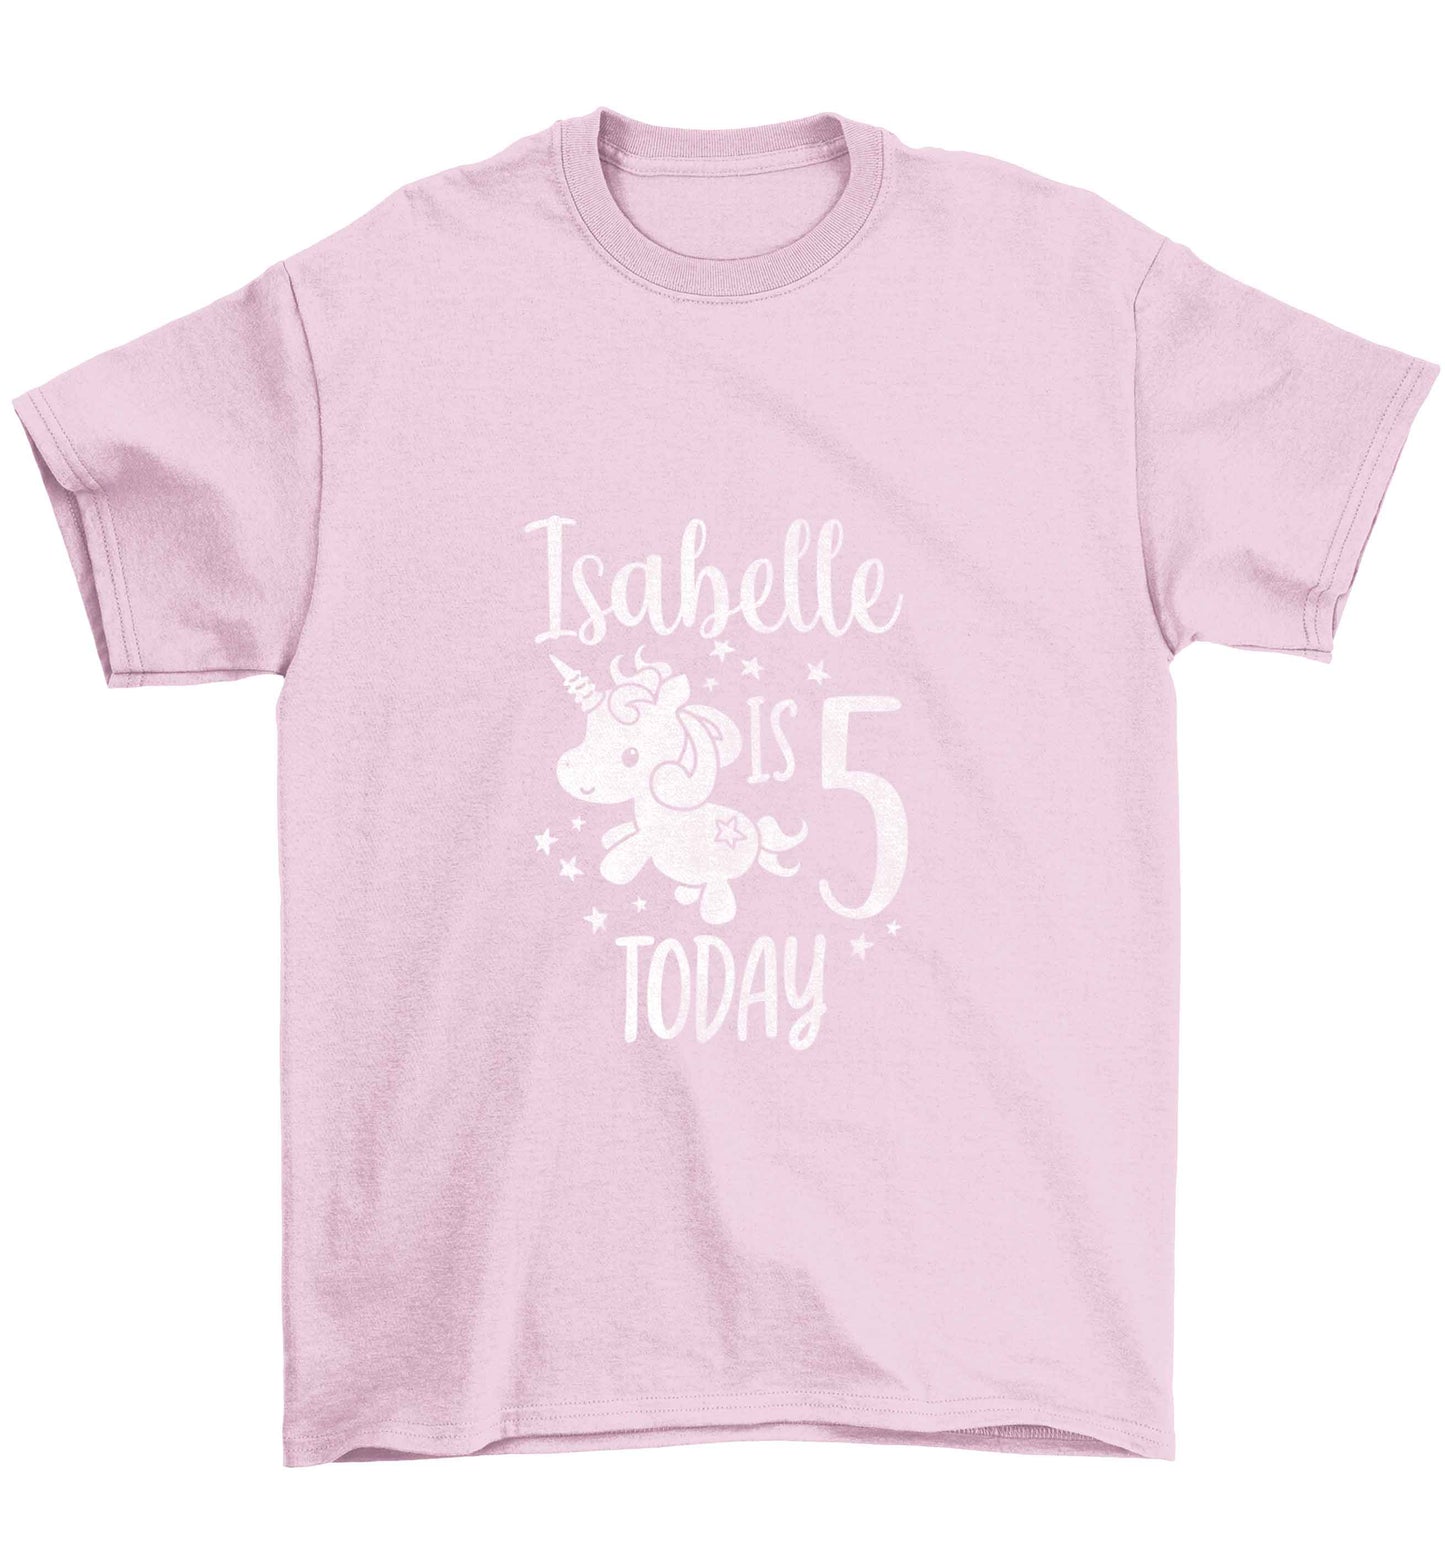 Today I am - Personalise with any name or age! Birthday unicorn Children's light pink Tshirt 12-13 Years